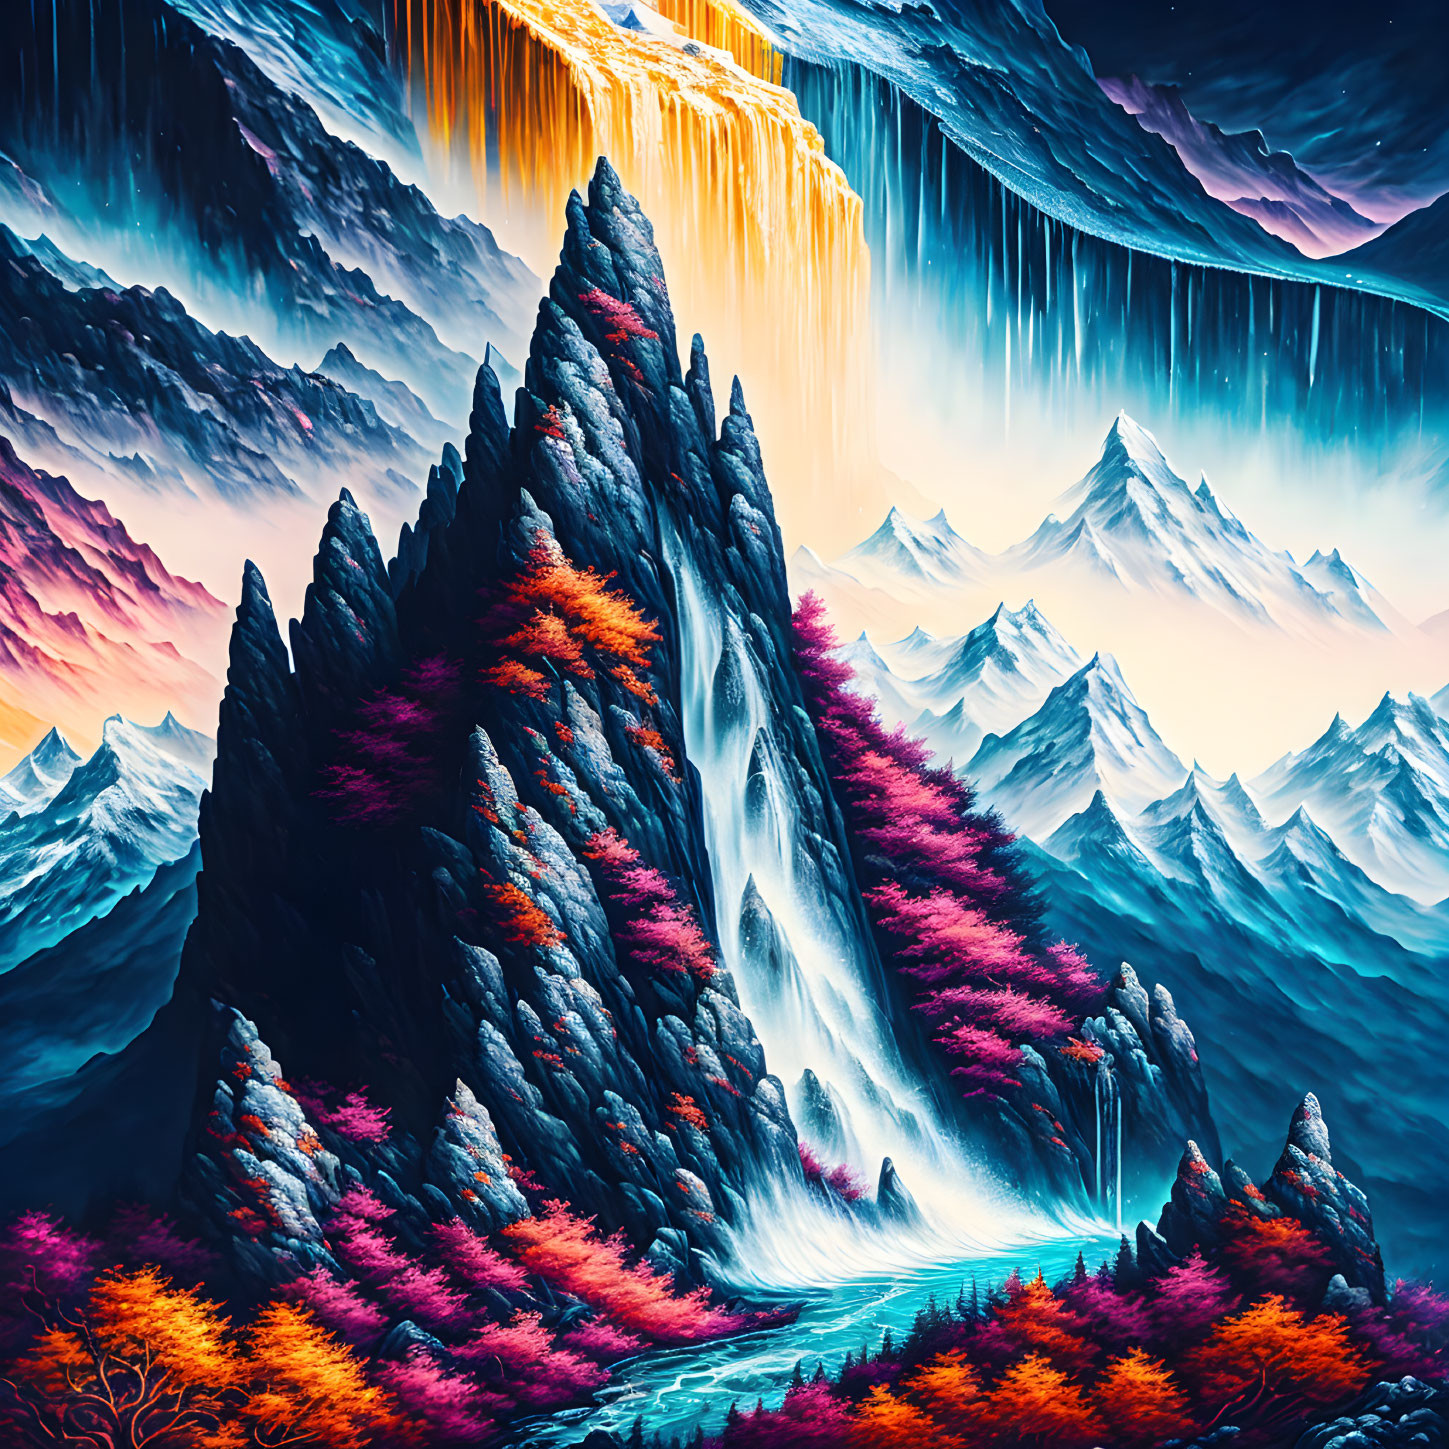 Fantastical landscape with towering mountain, waterfalls, colorful forests, snowy peaks, twilight sky